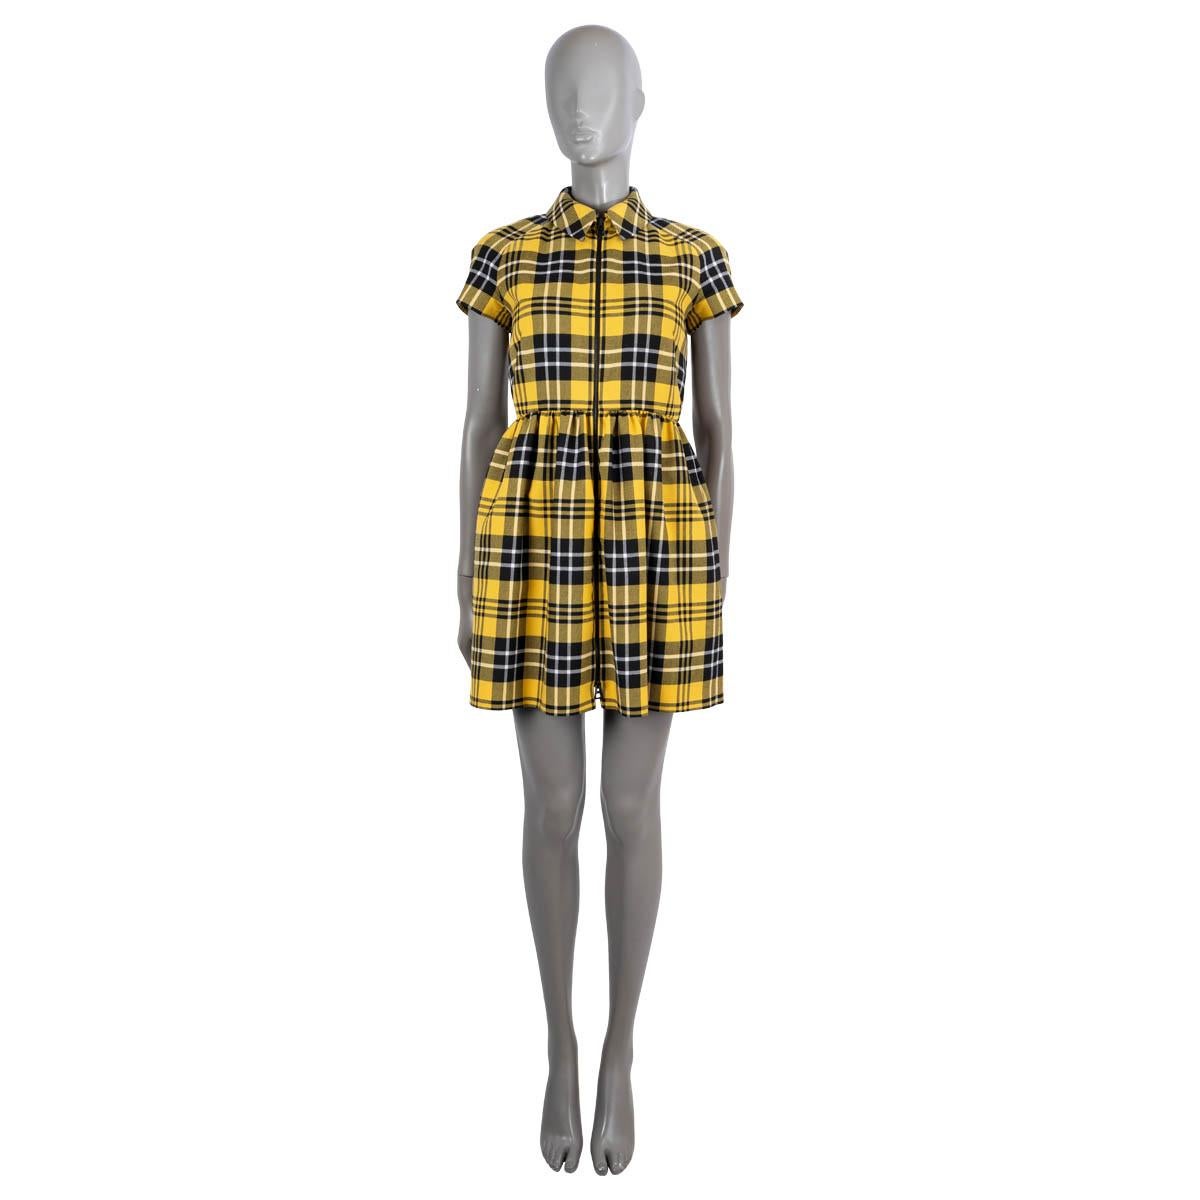 100% authentic Christian Dior Check'n'Dior mini dress in yellow and black plaid twill wool (100%). Features short raglan sleeves (sleeve measurement taken from the neck) and gathered skirt and two side pockets. Closes with a zipper on front. Lined